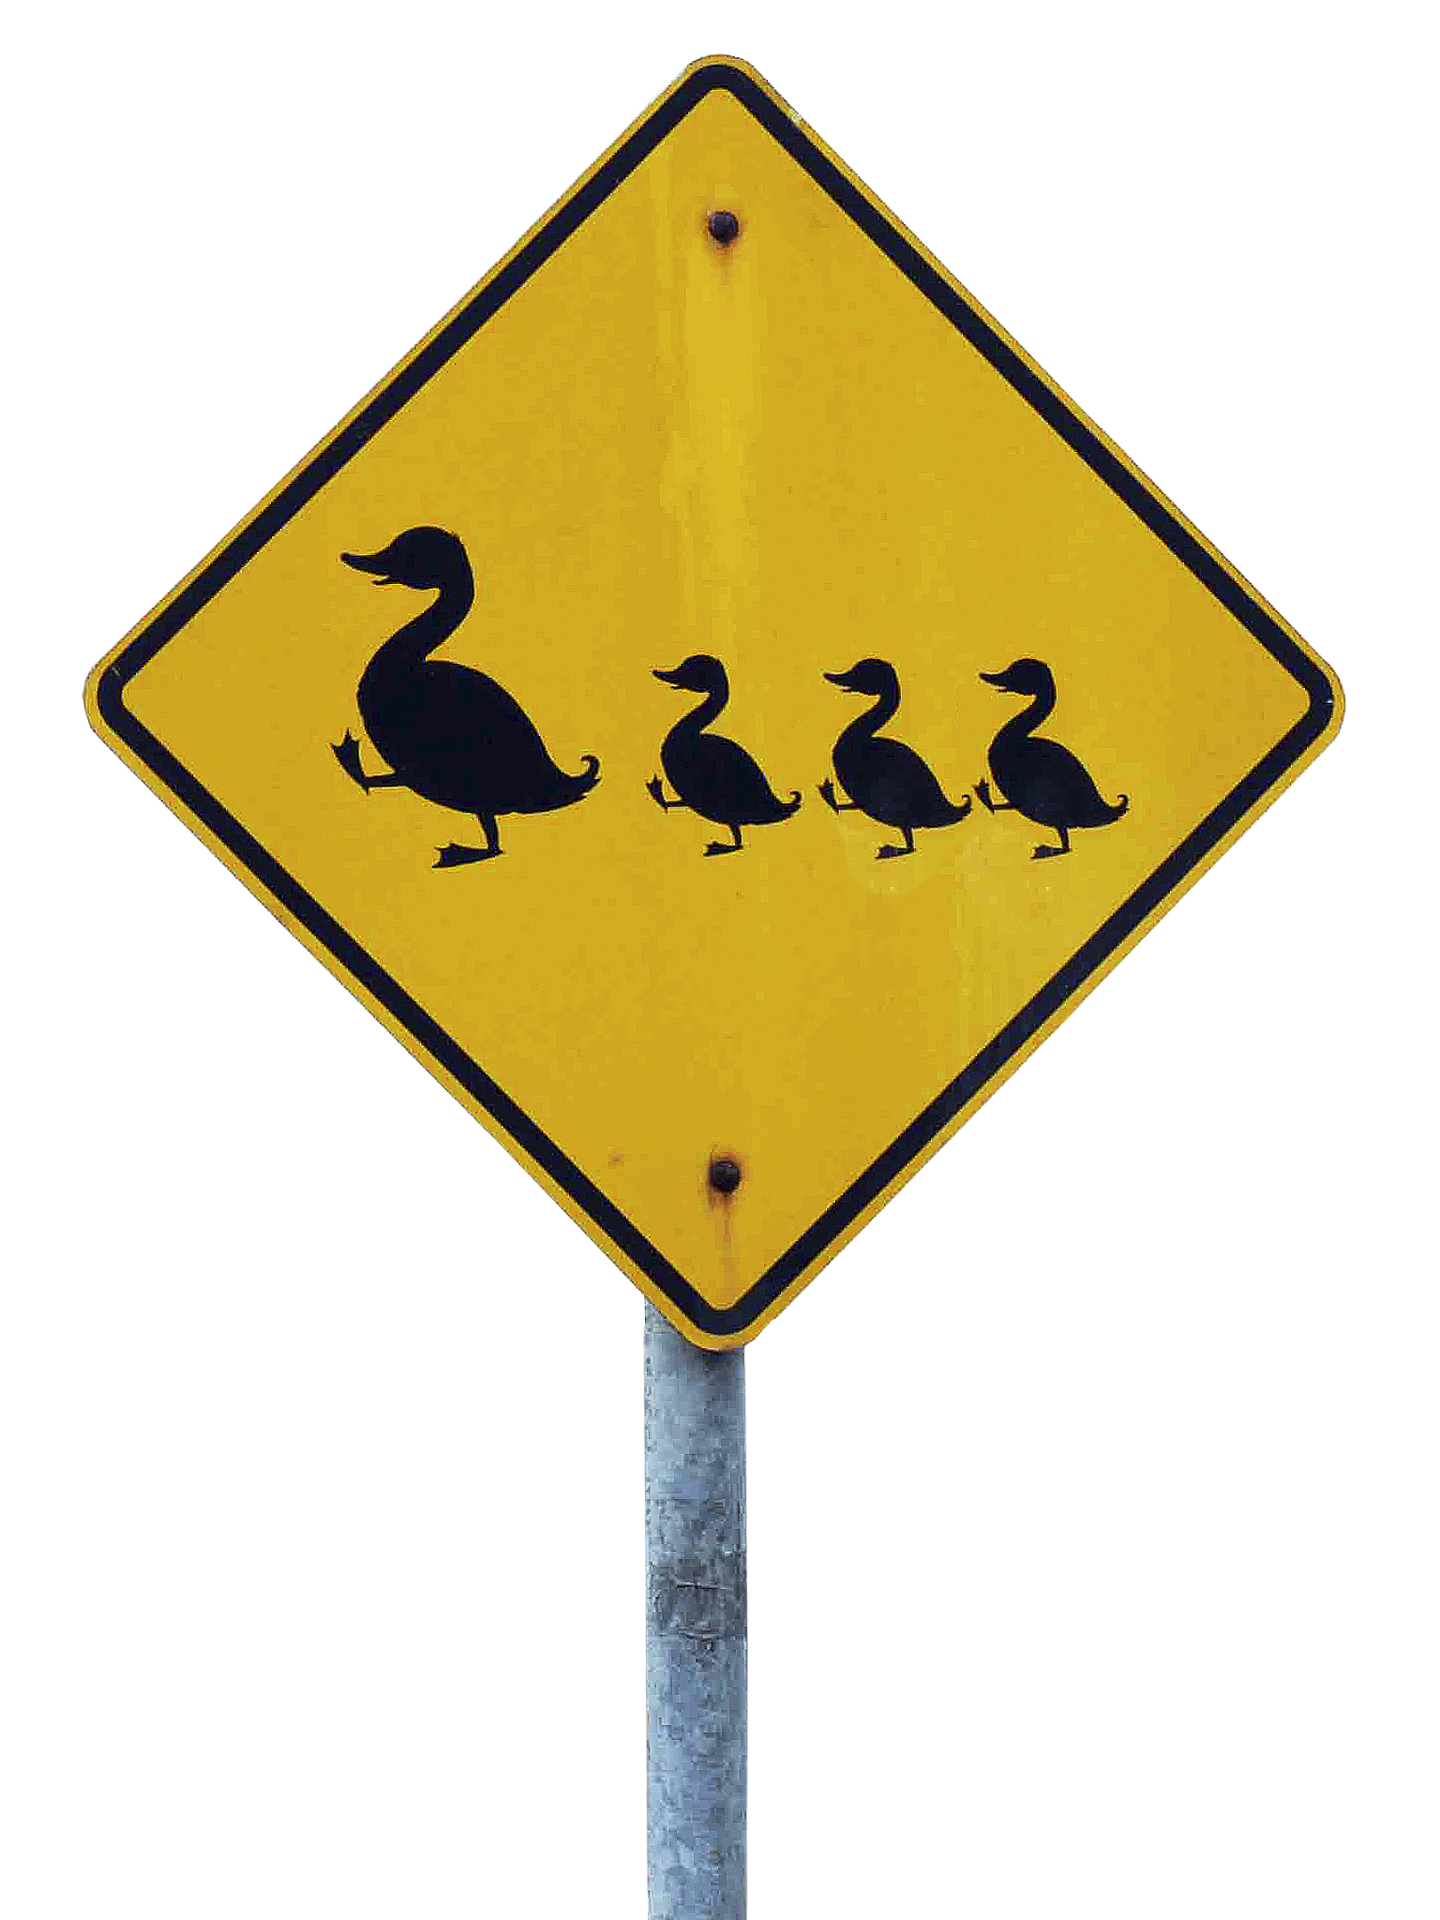 New signs unveiled in Spain’s Alhaurin de la Torre in bid to protect ducklings crossing road